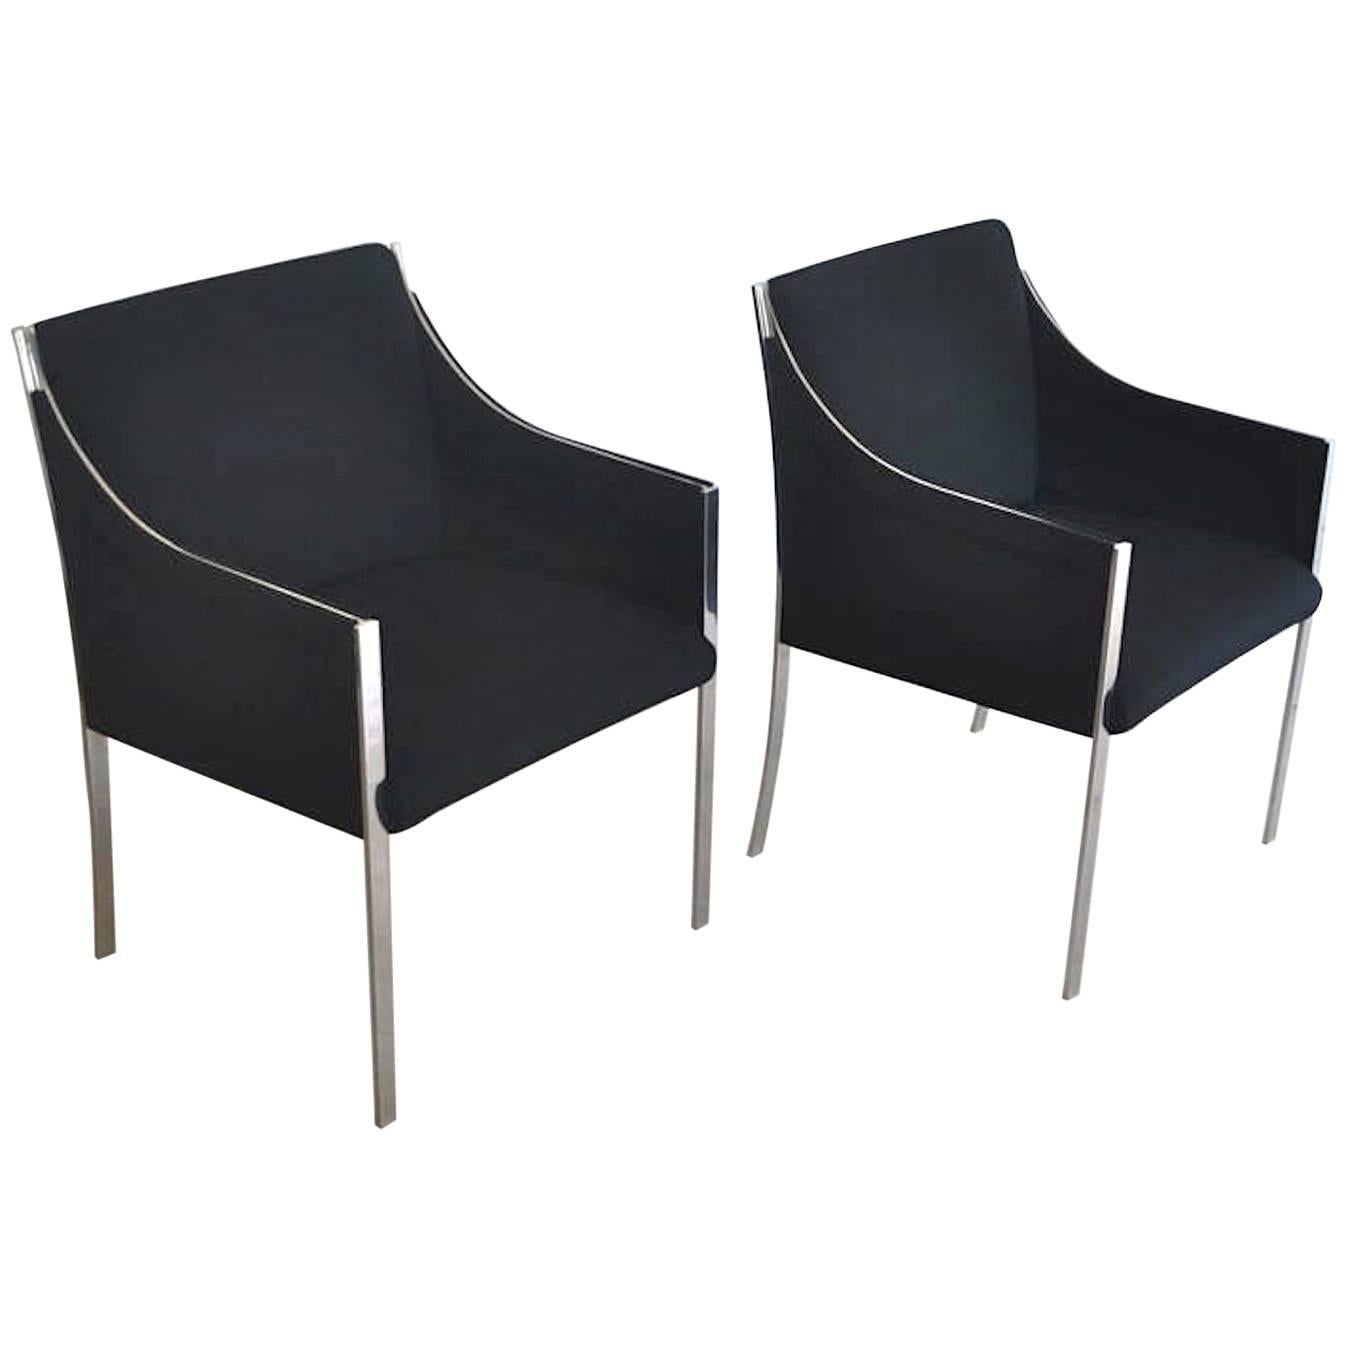 Pair of Midcentury Occasional Chairs or Lounge Chairs by Jens Risom 1